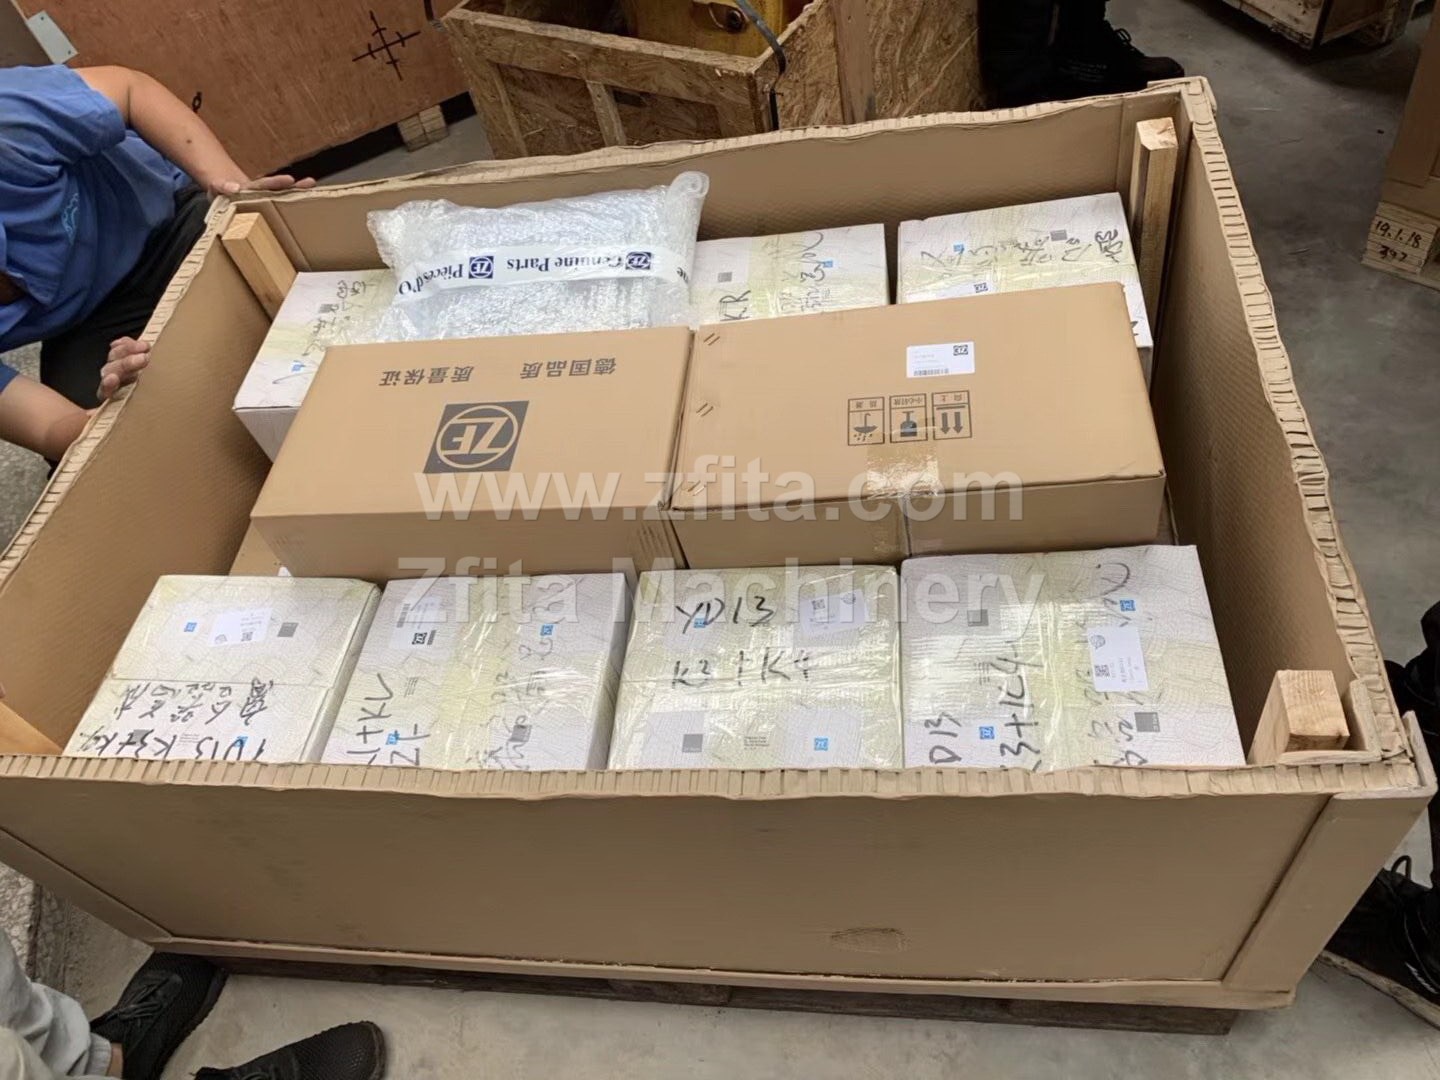 ZF parts ready for shipping(图1)